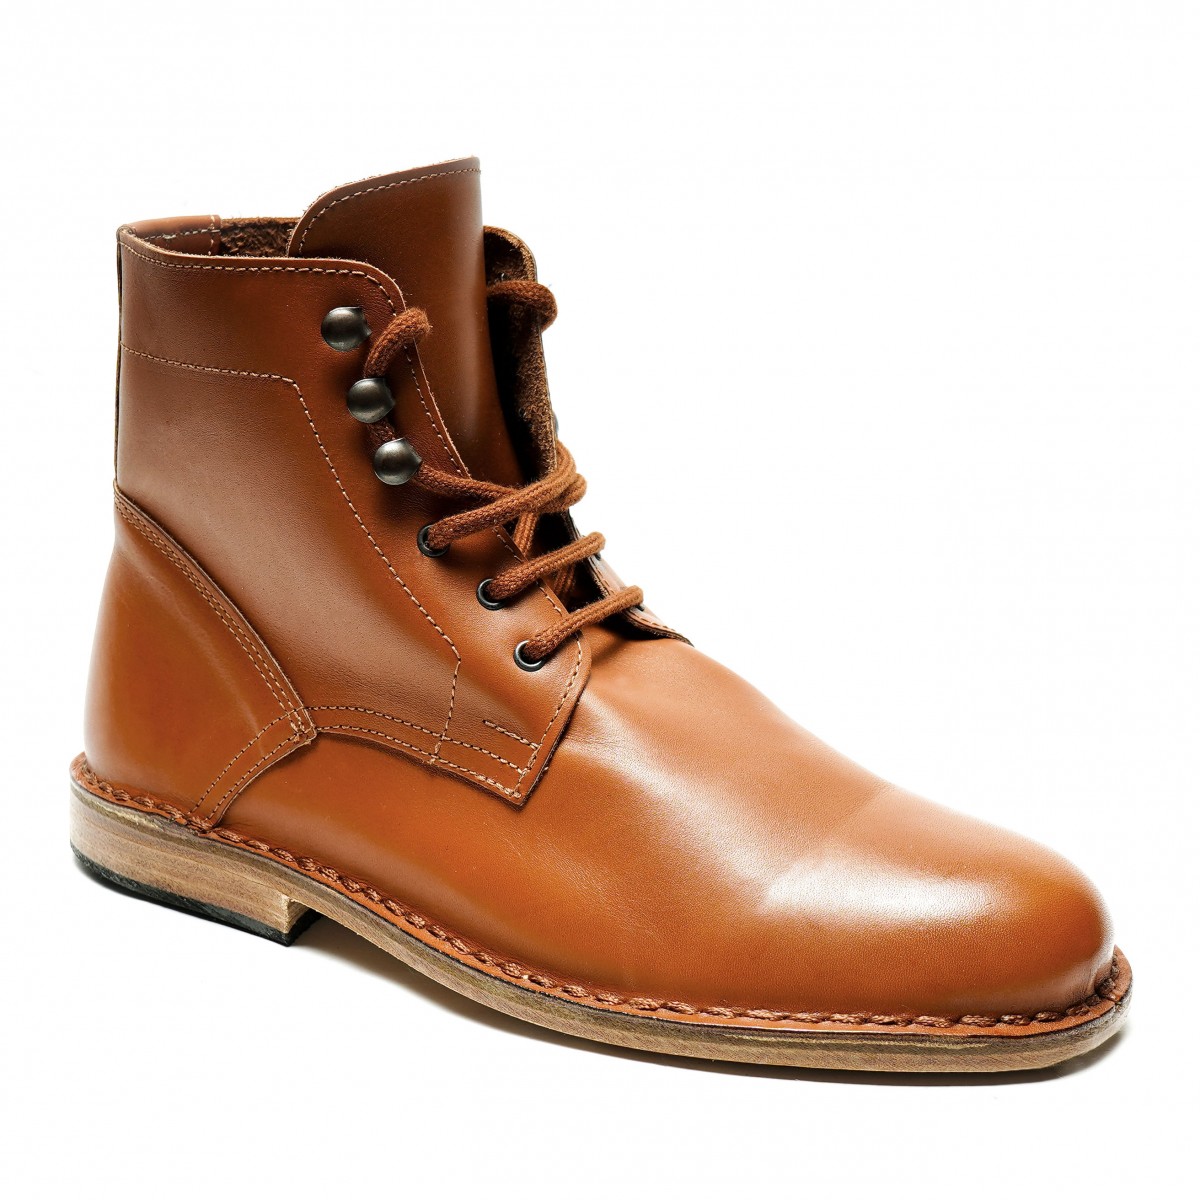 Men's tan leather ankle boots handmade in Italy The leather craftsmen